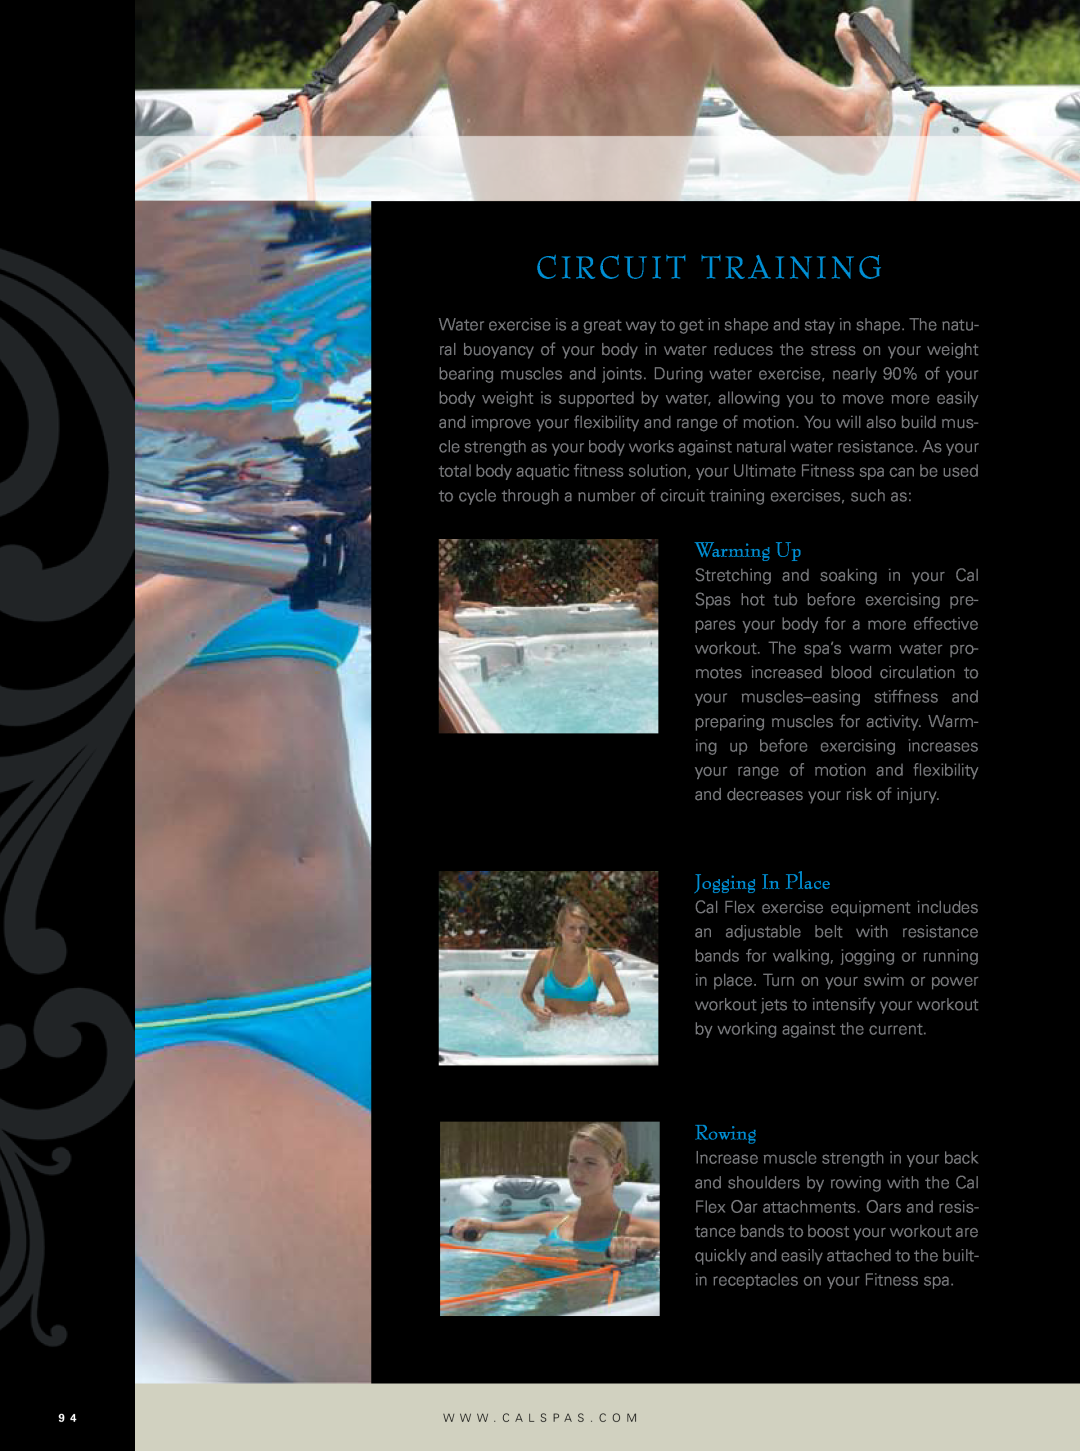 Cal Flame Hot Tub manual circuit training, Warming Up, Jogging In Place, Rowing 